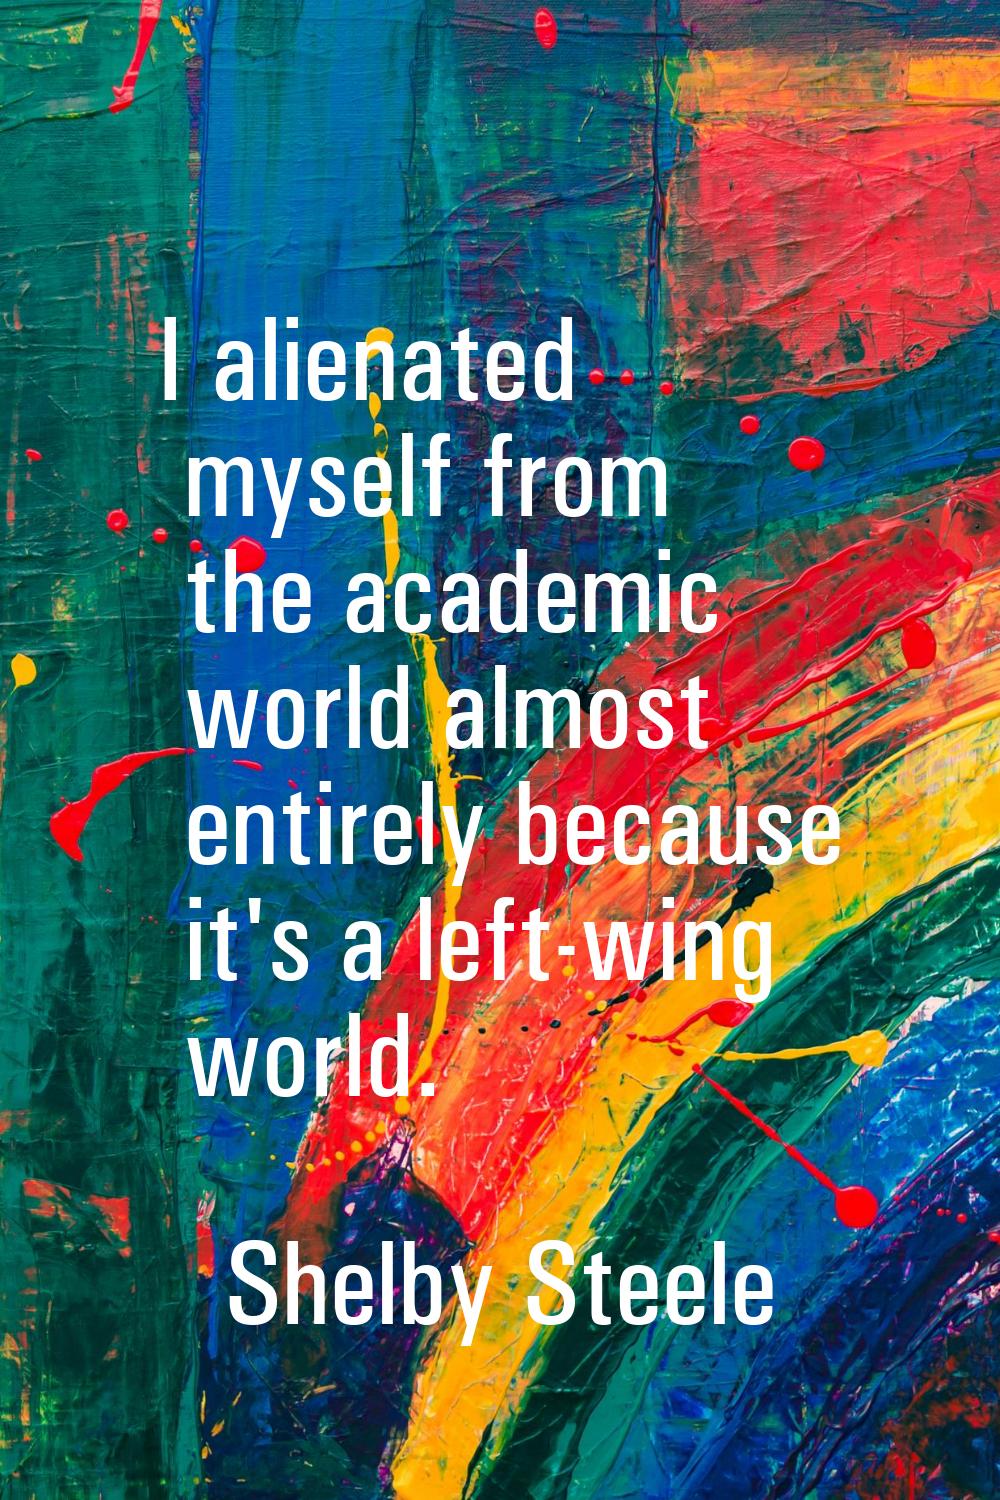 I alienated myself from the academic world almost entirely because it's a left-wing world.